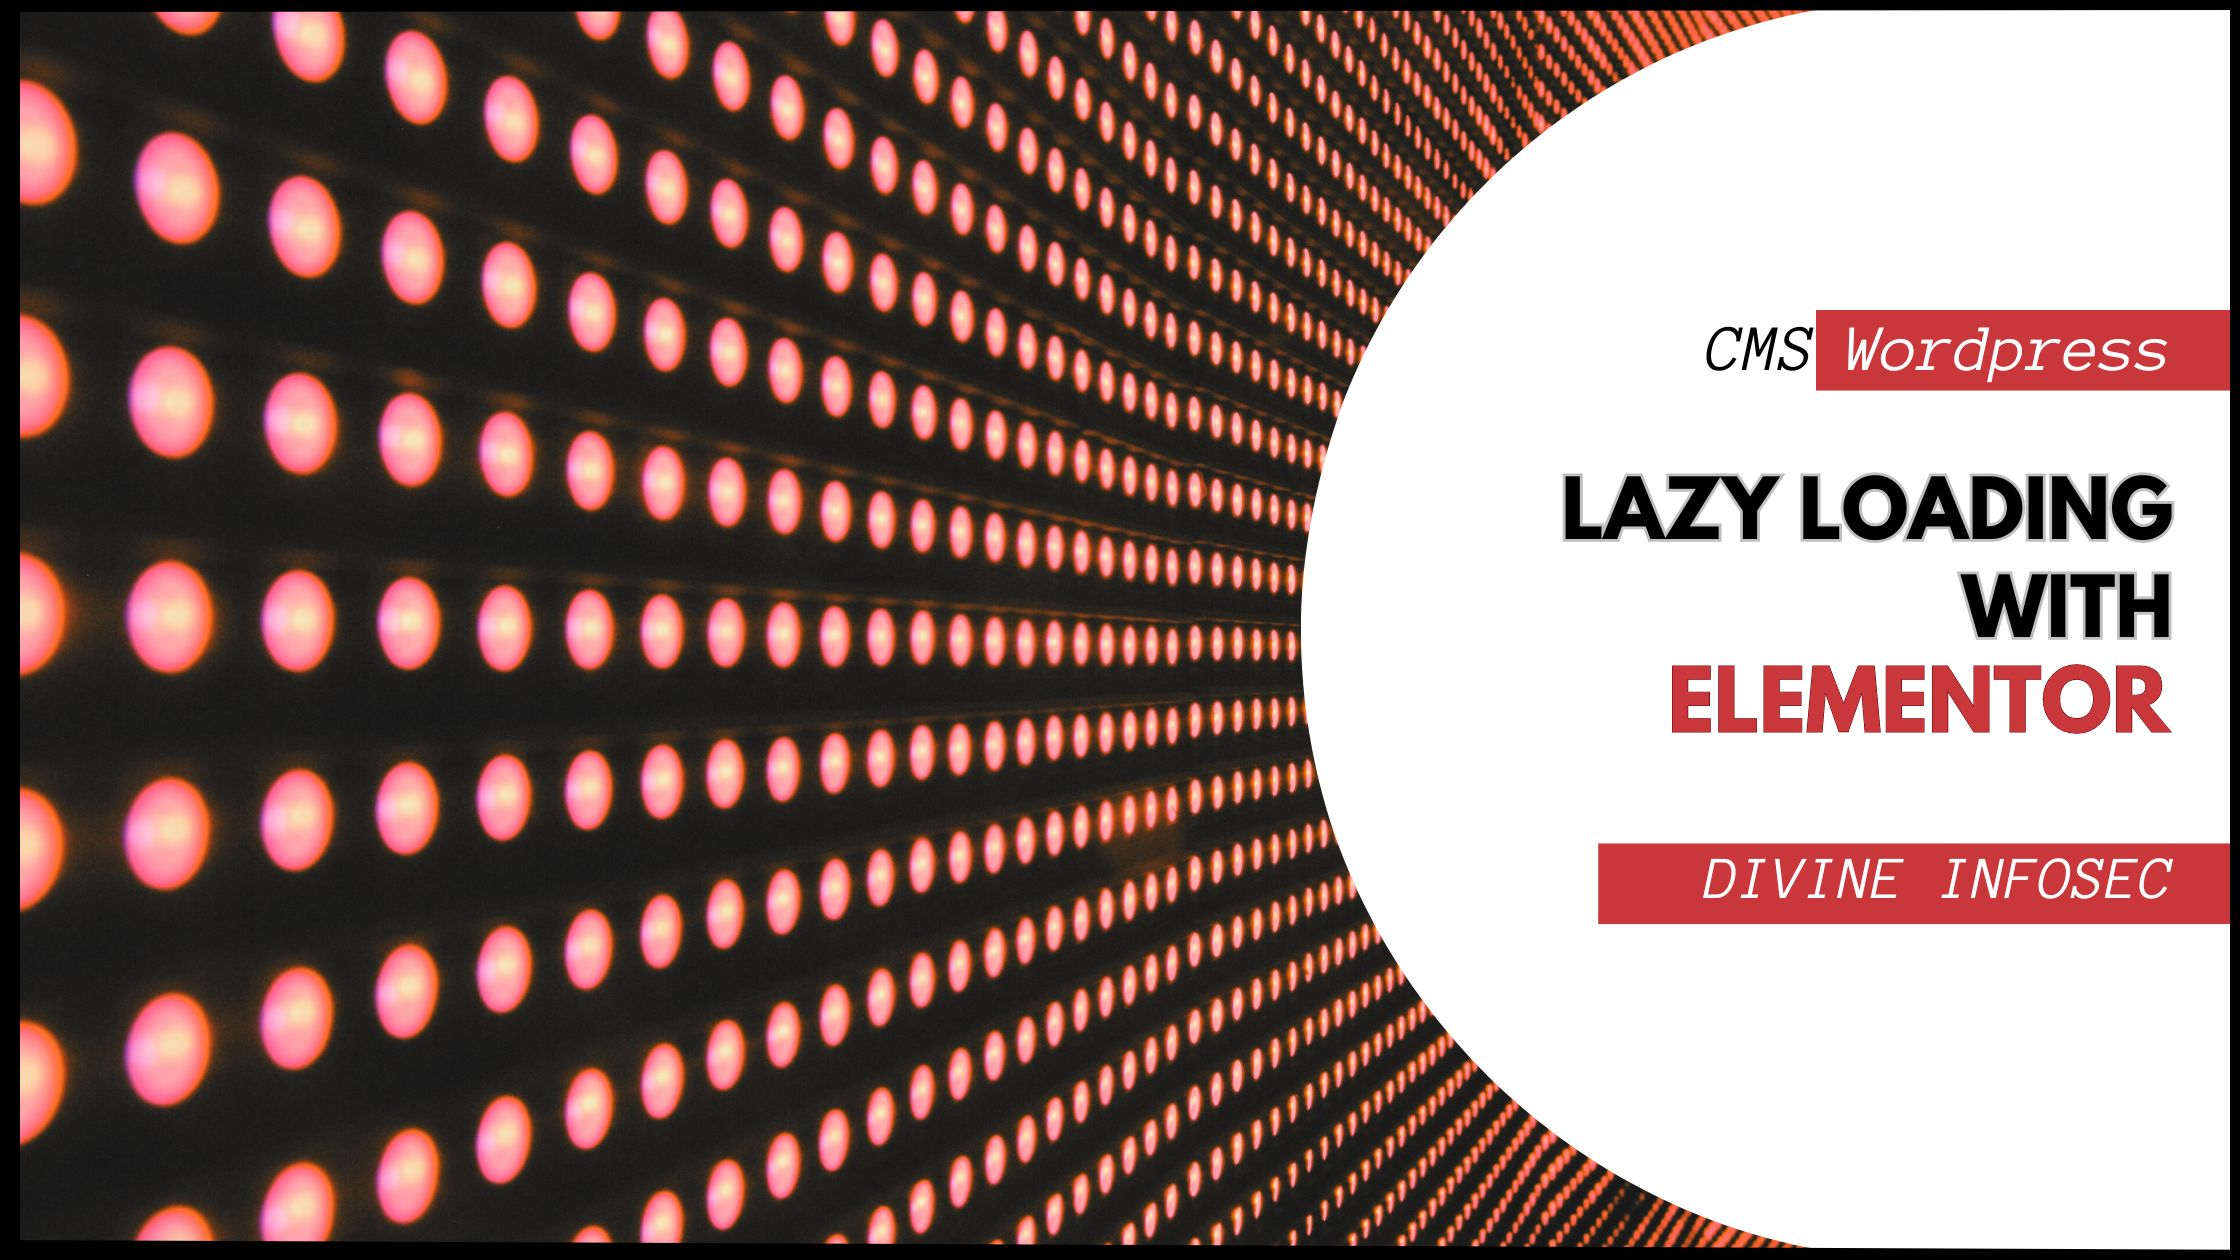 How do you lazy load an Elementor?